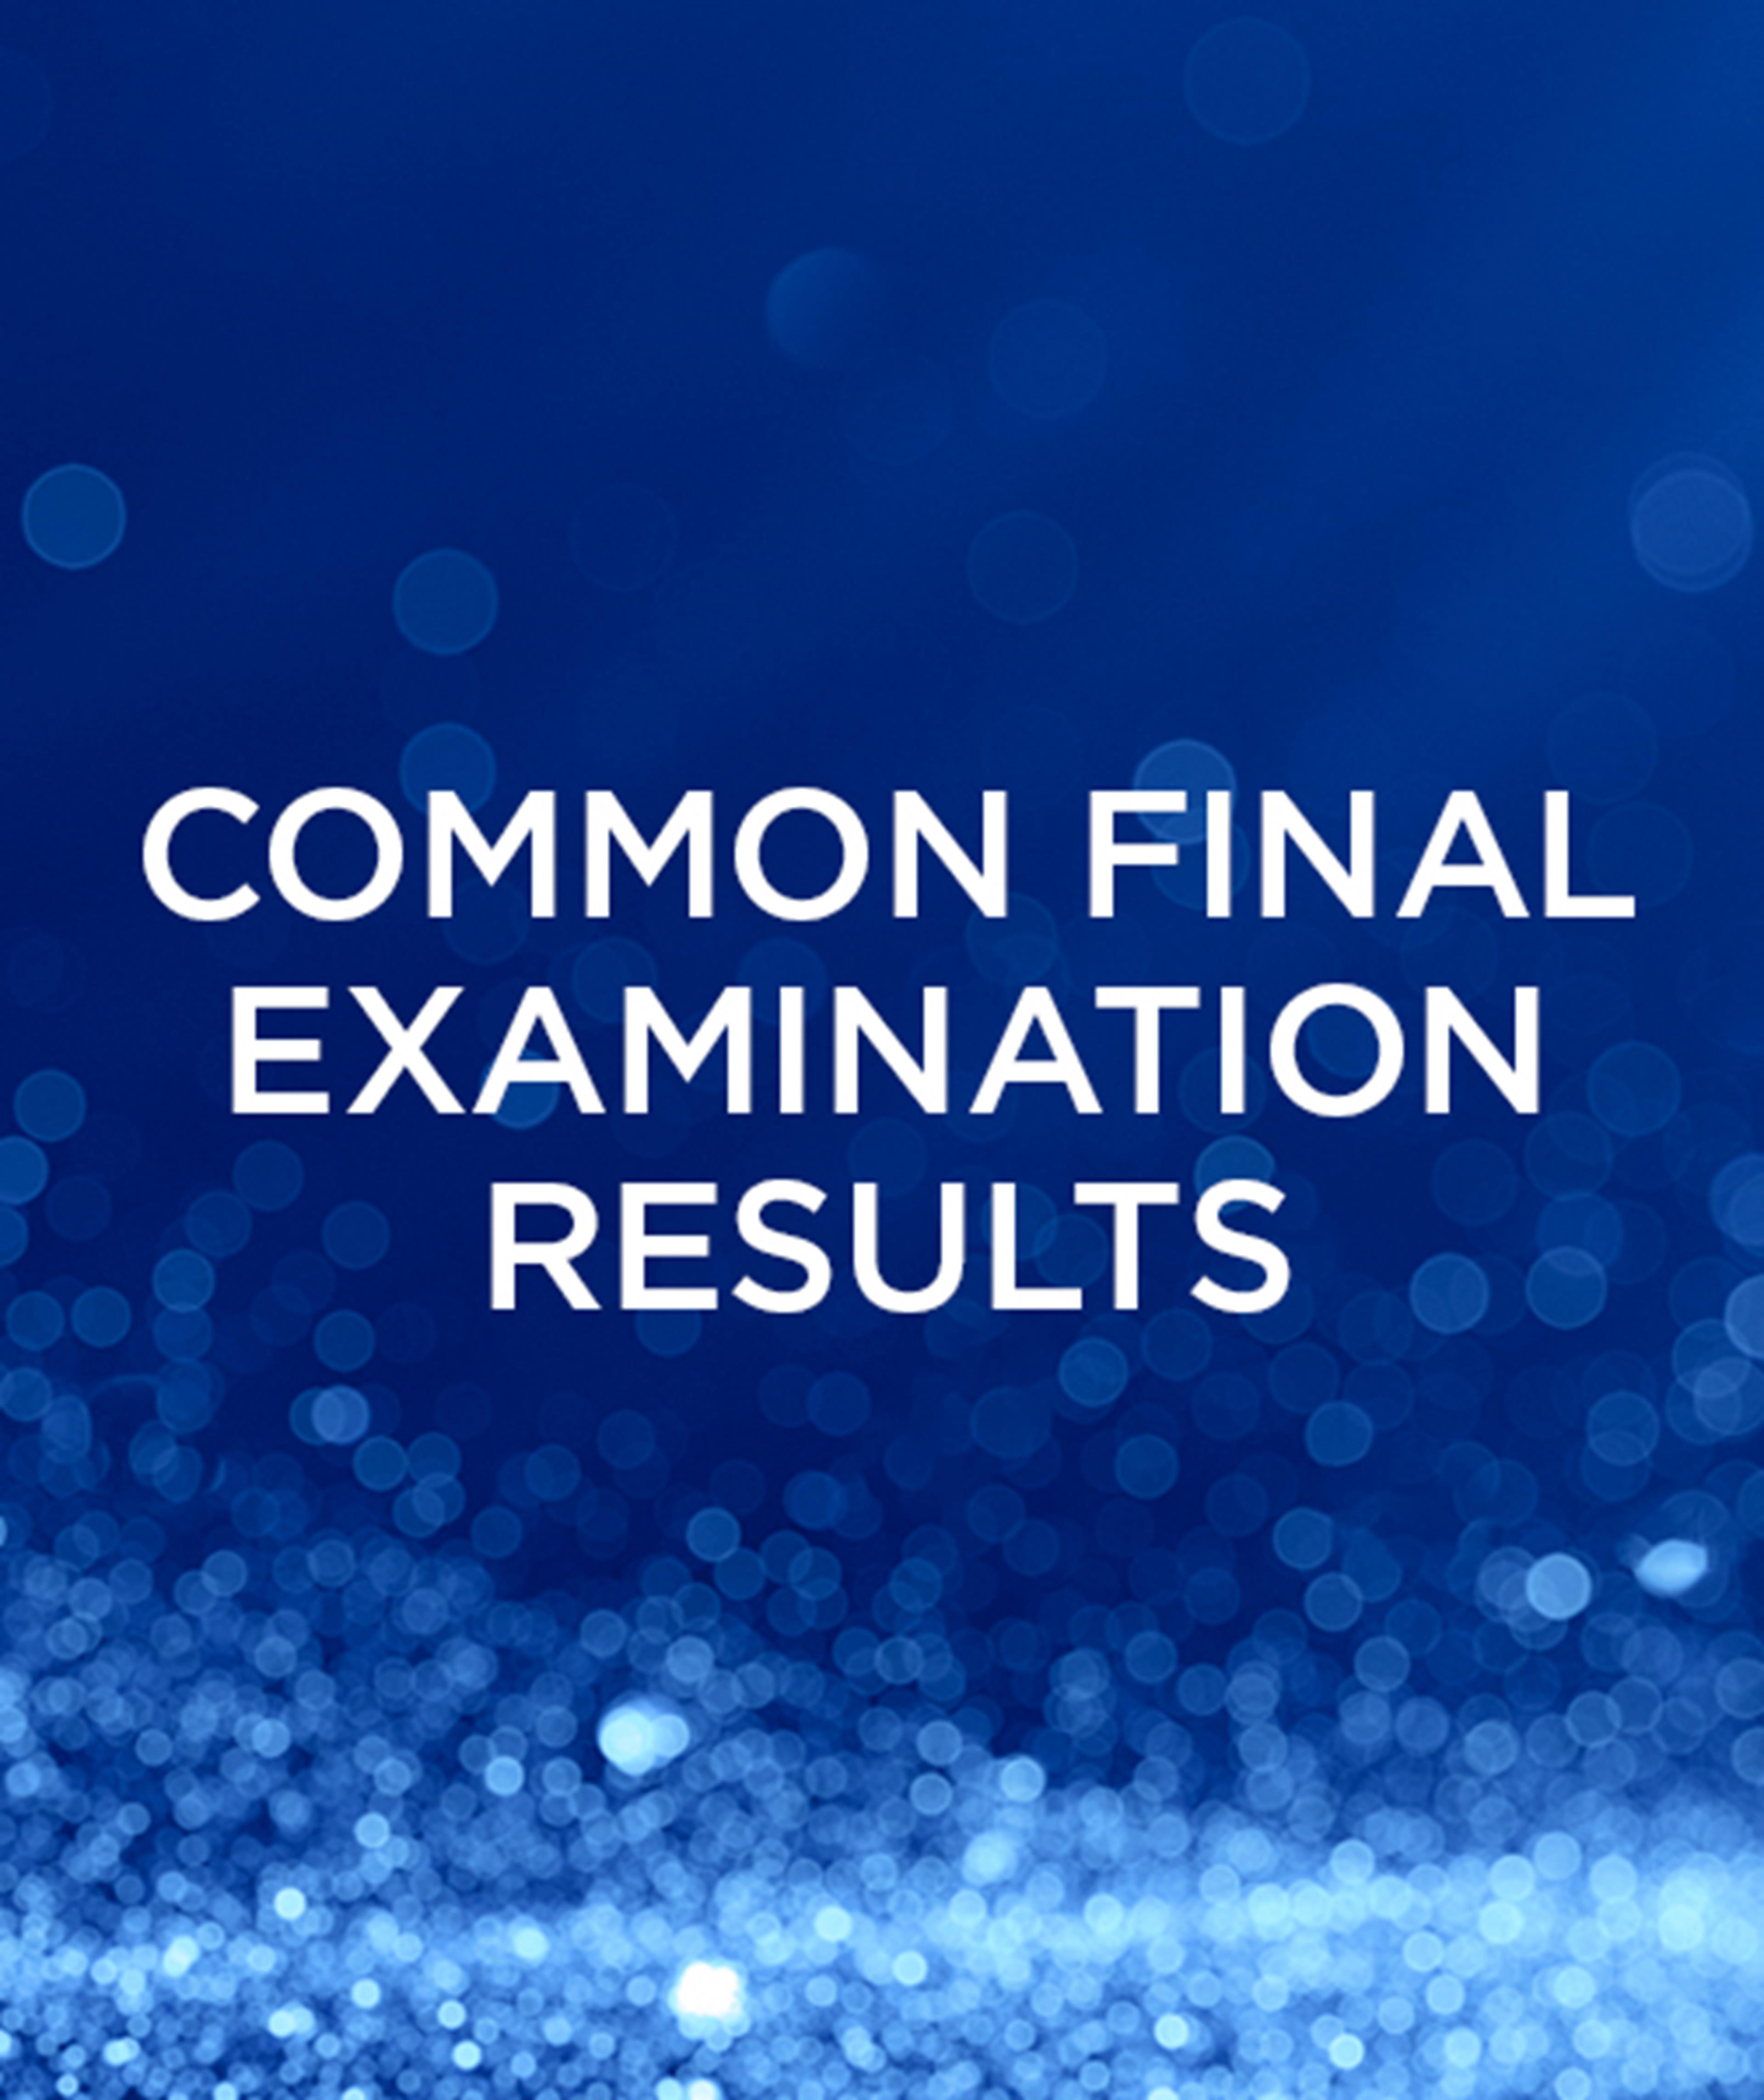 Common final examination results